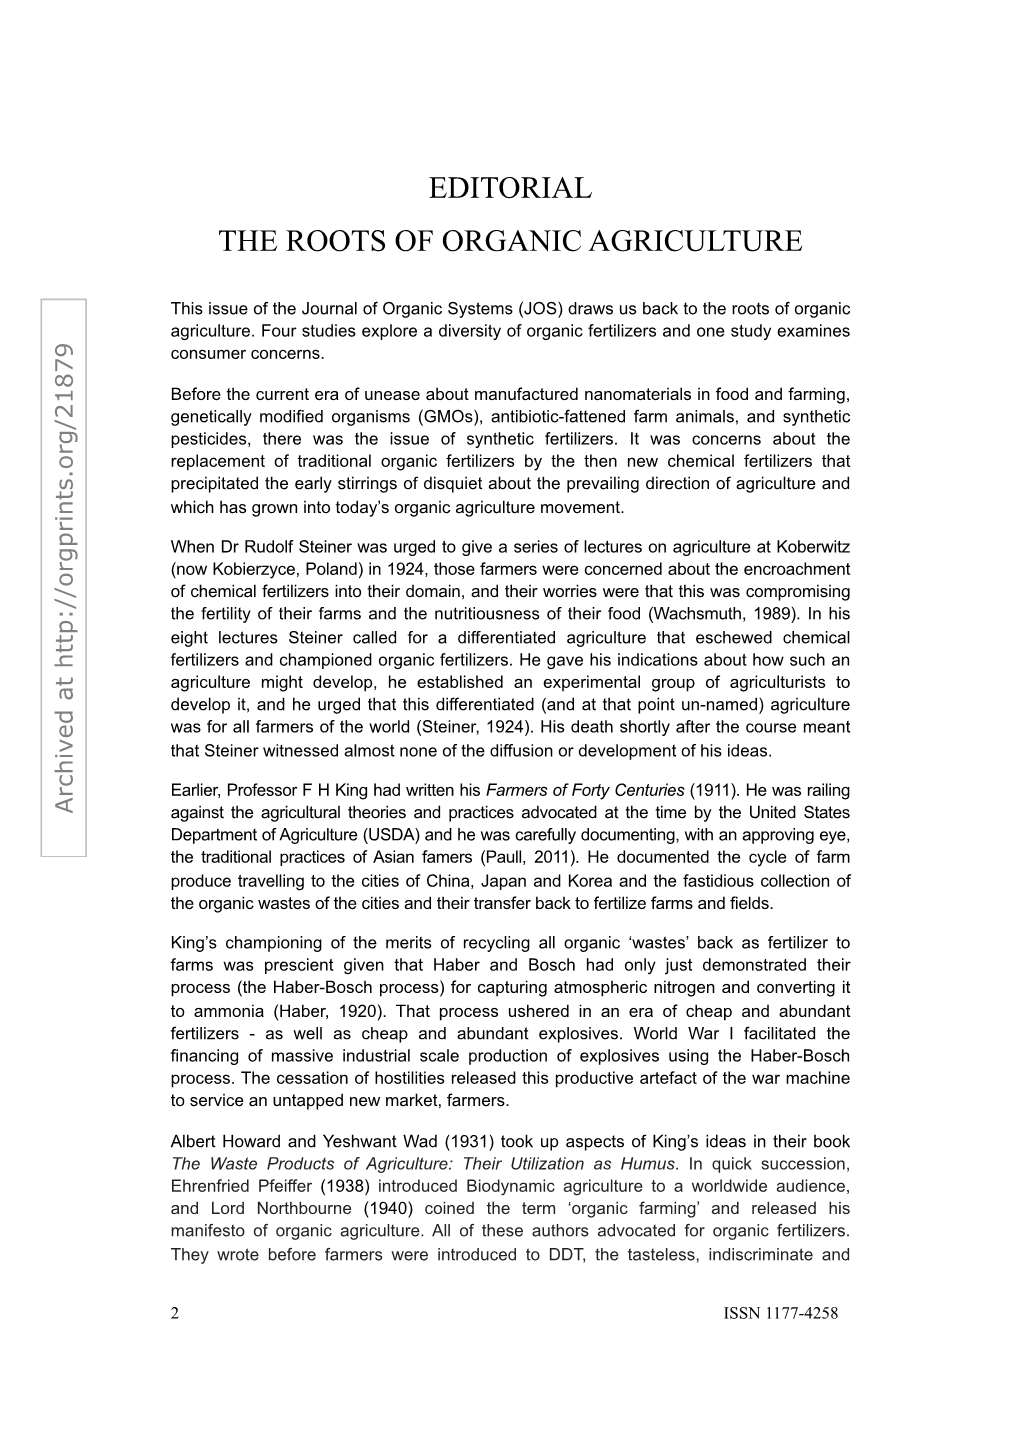 Editorial the Roots of Organic Agriculture